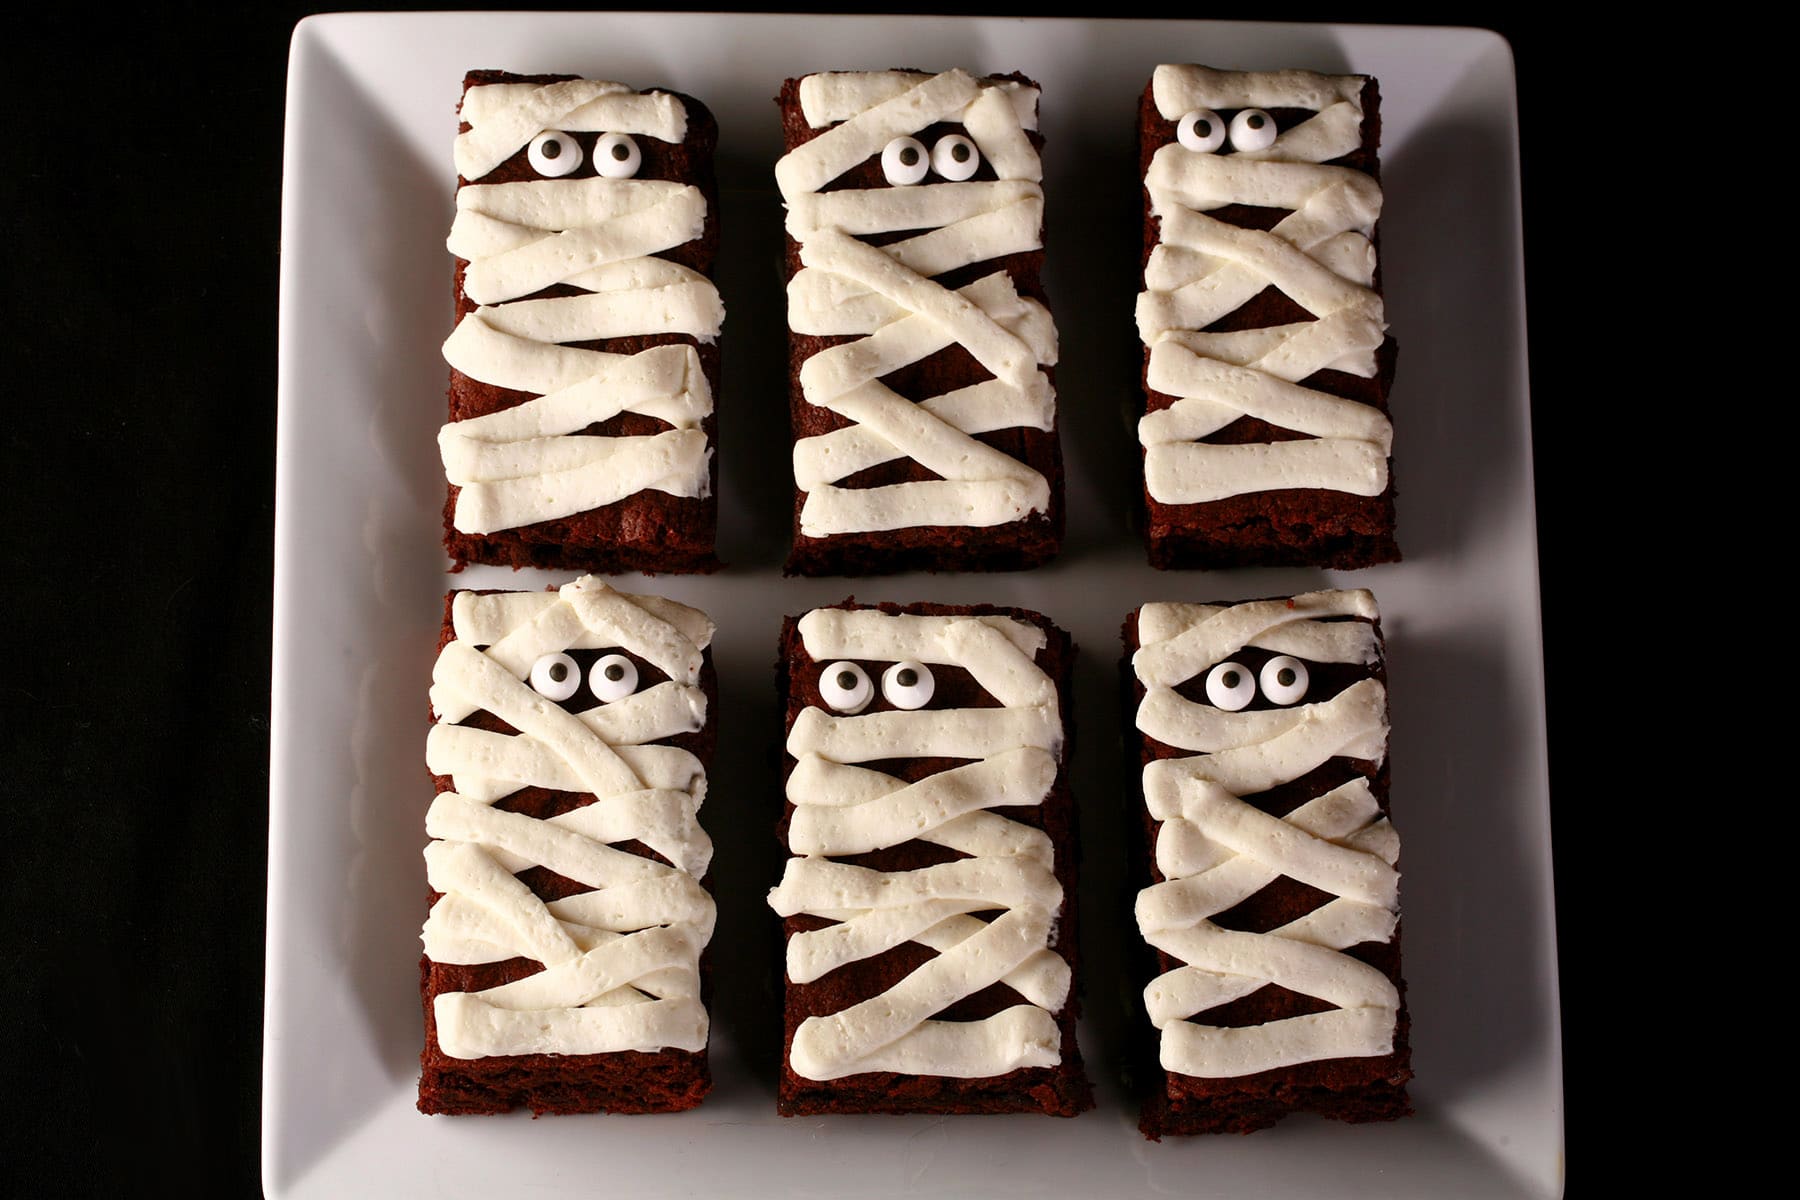 A plate of mummy brownies, with candy eyeballs.